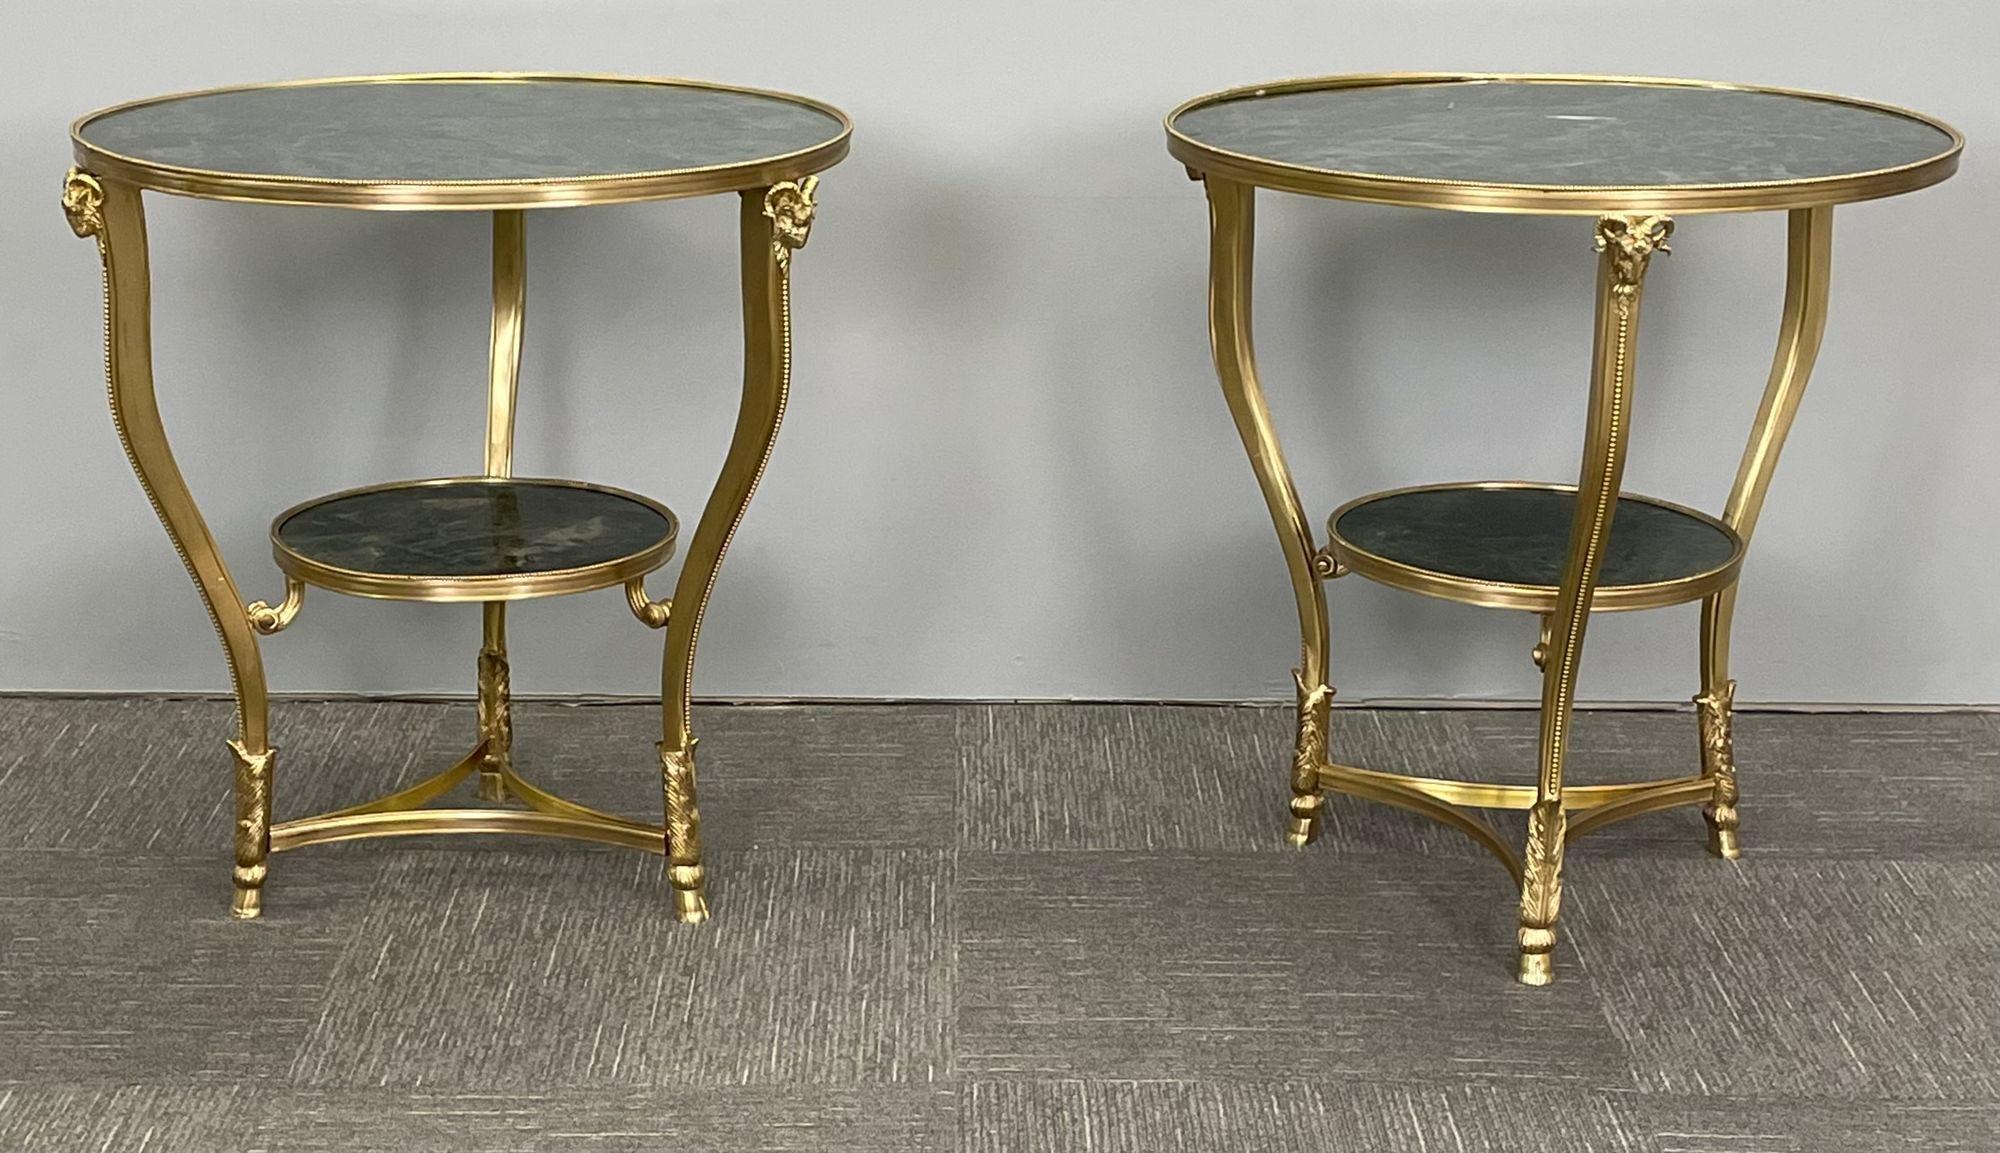 Pair of Hollywood Regency Louis XVI Style Malachite Style Gueridons, Rams Head
 
A most elegant and high quality French 19th/20th century Louis XVI style ormolu and malachite style marble top Guéridons or side tables. The circular table is raised